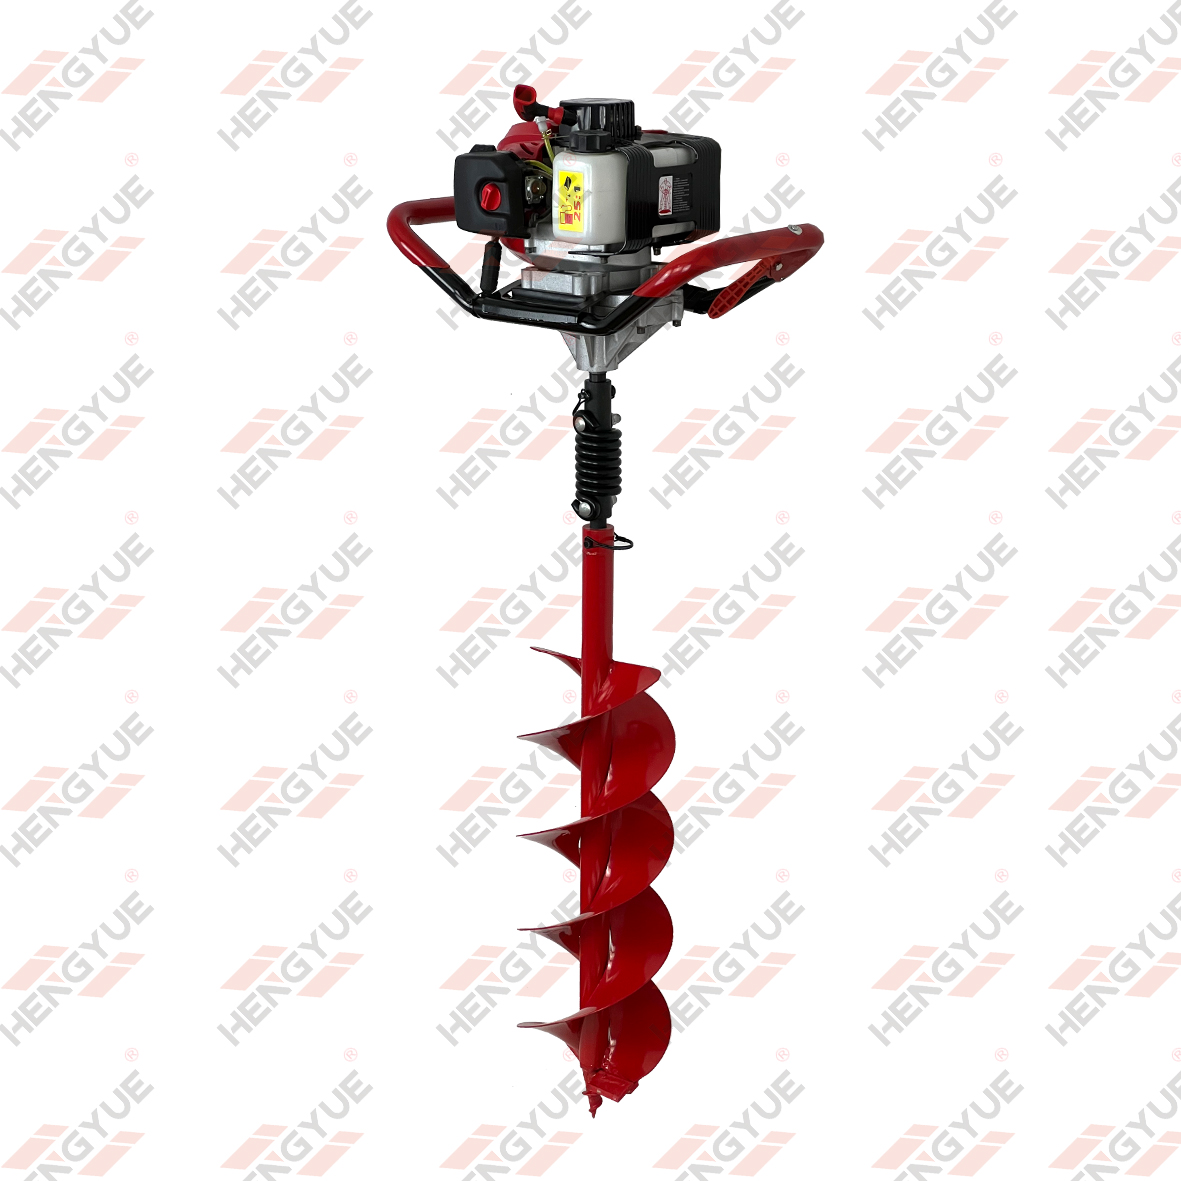 Powered by HONDA GX35 Hand Held Earth Auger Drilling Machine